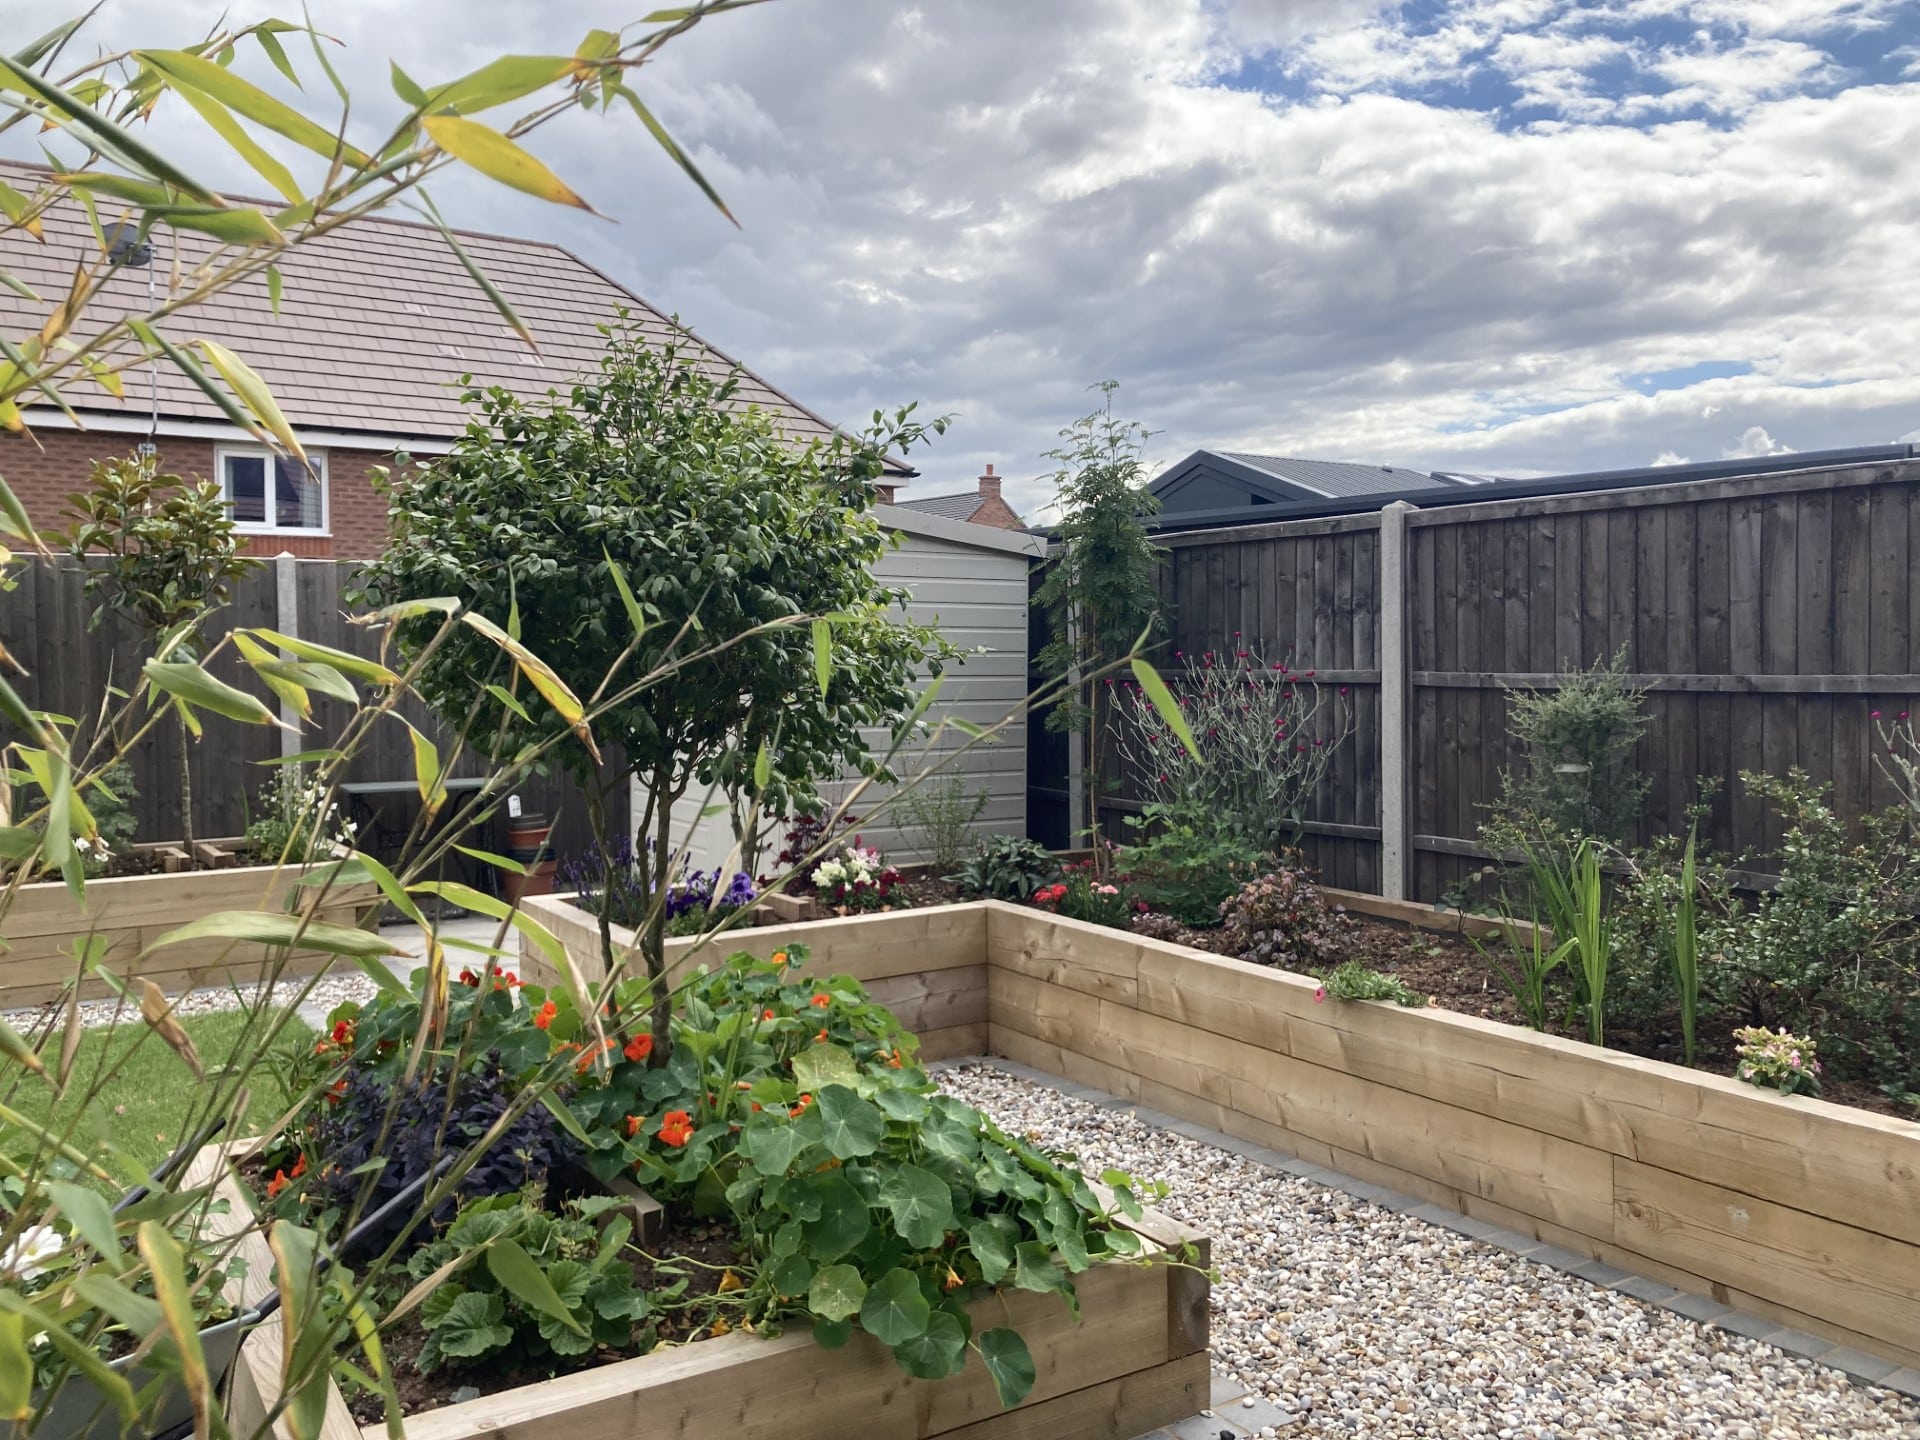 Cottage Garden in Suburbia Case Study - After